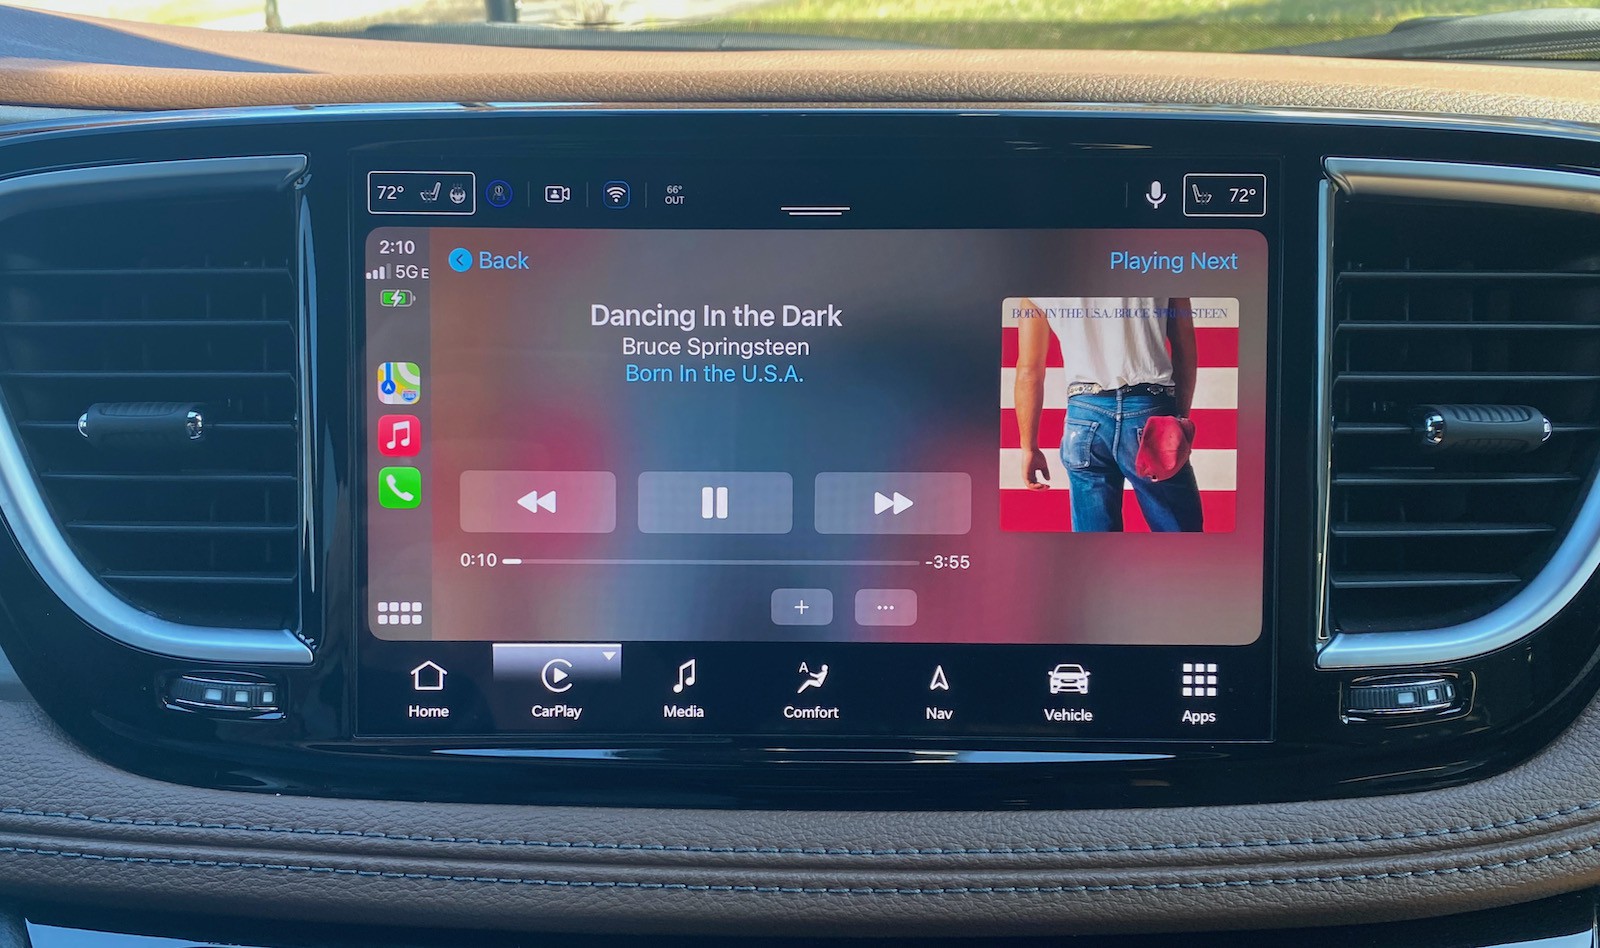 2021 Pacifica Uconnect 5 and Wireless CarPlay Review MacRumors